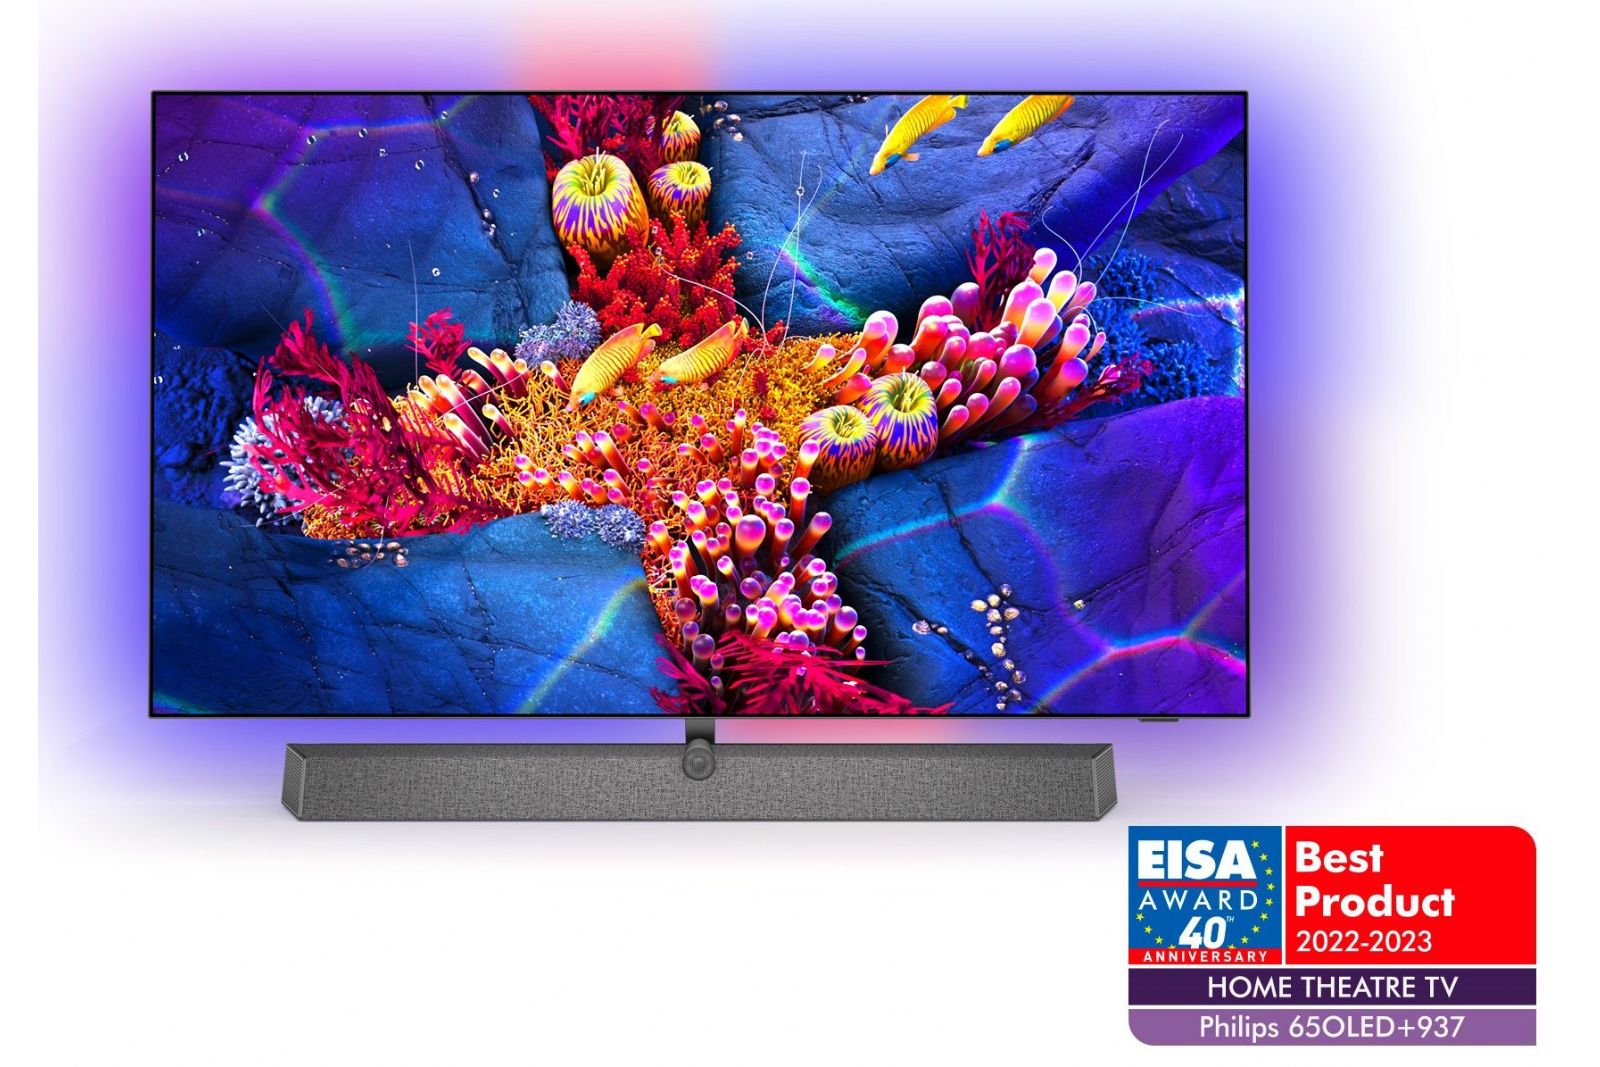 TV-apparater Philips 65OLED937/12 65-tums 4K UHD Smart-TV